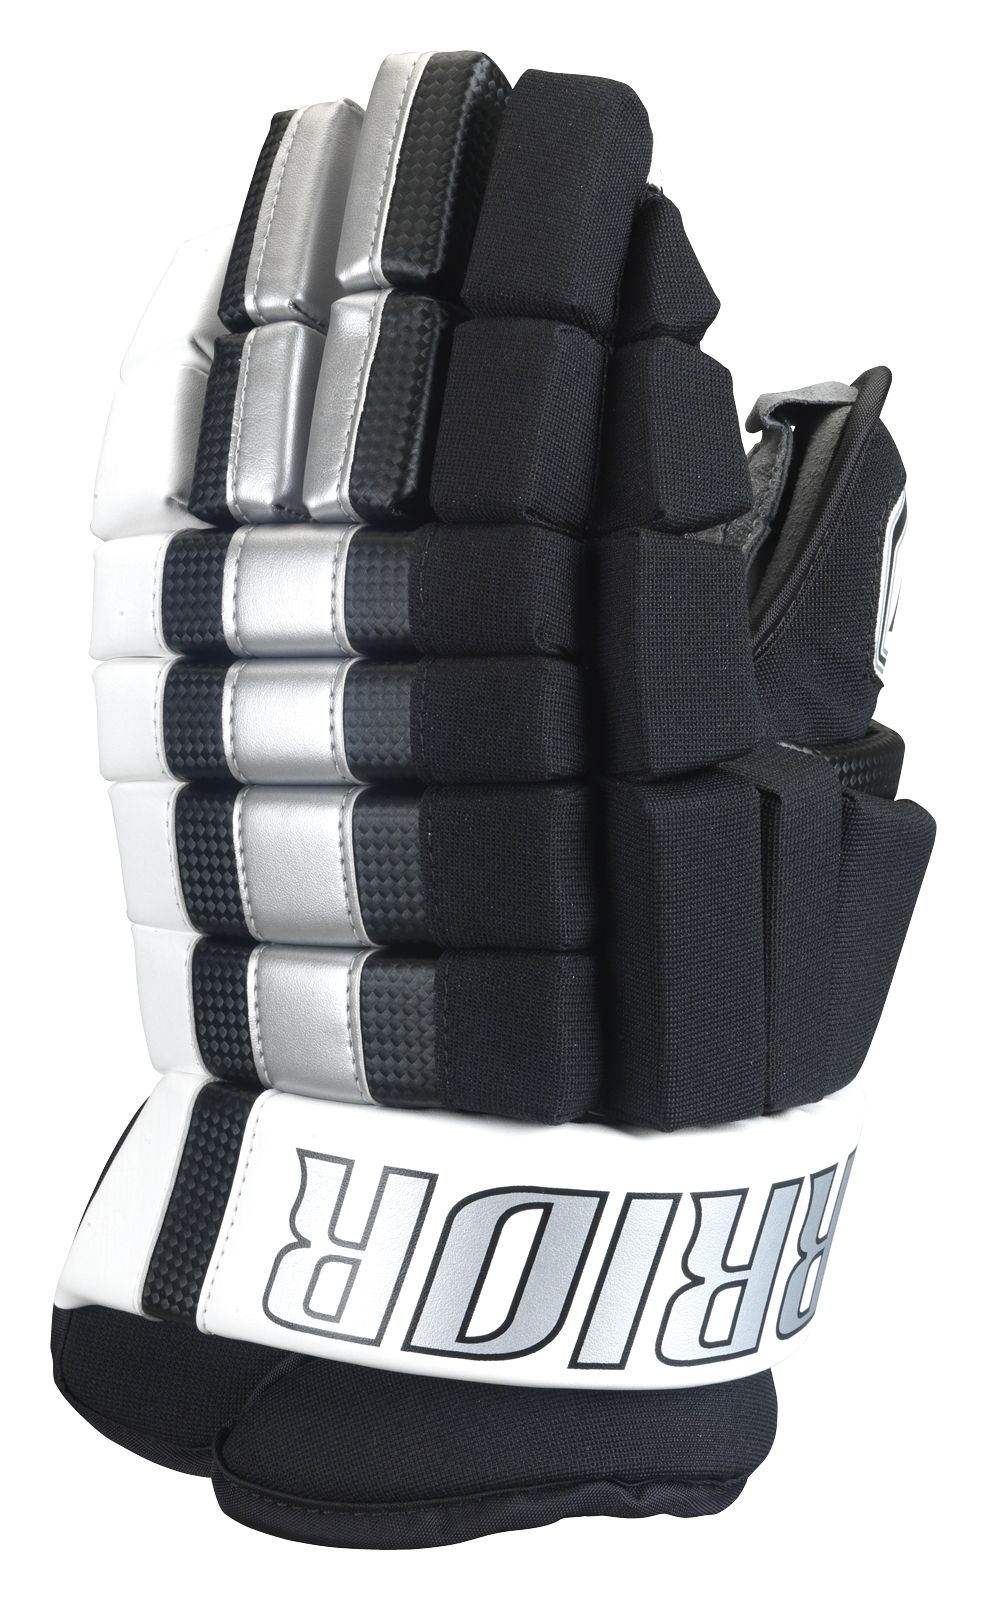 Franchise Glove, Black with White image number 0